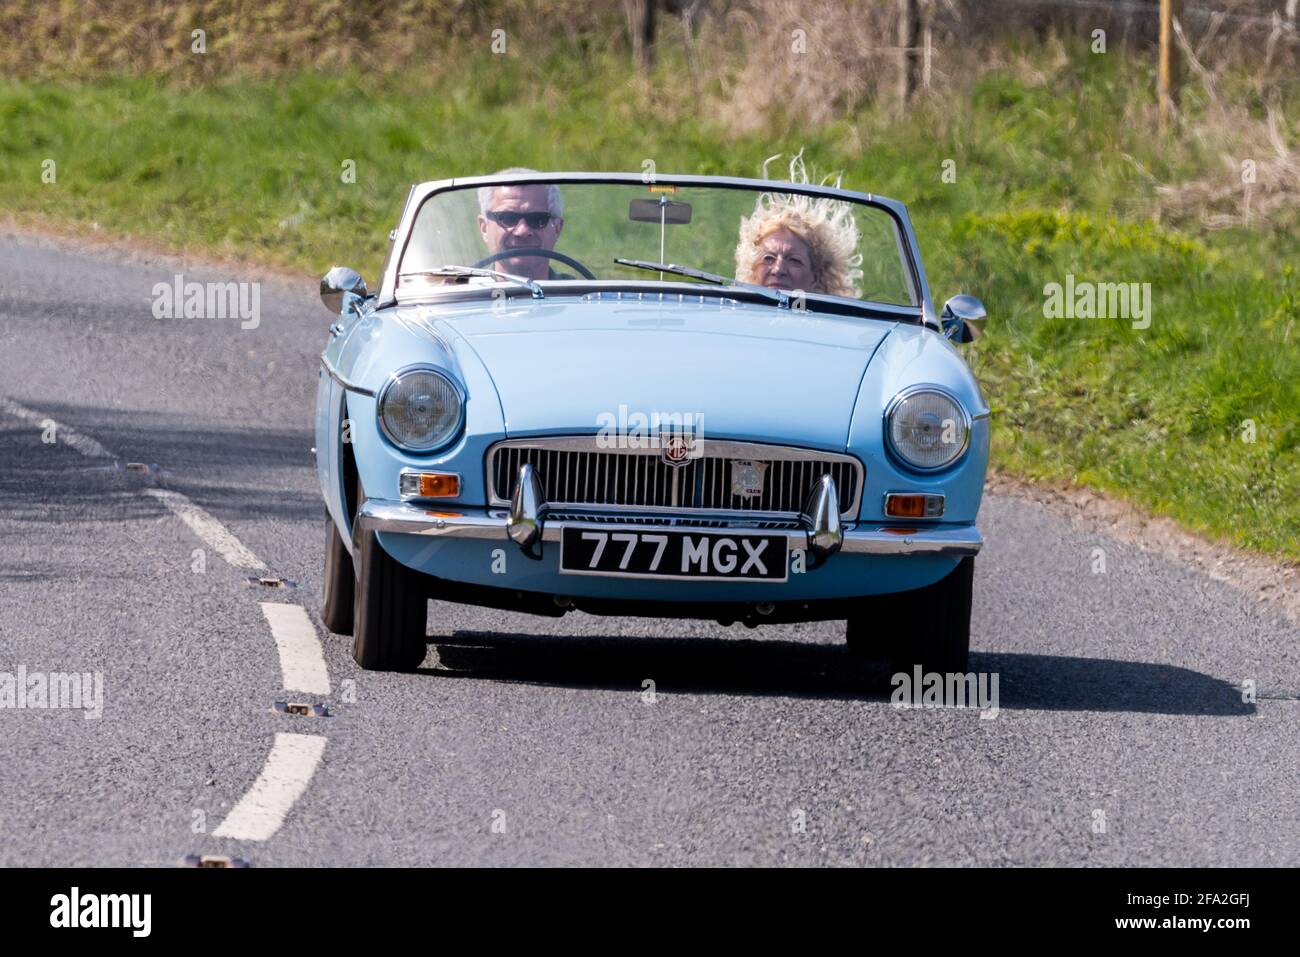 Wind in the hair motoring, couple in a classic blue MGB sports car, Alresford, Hampshire, UK Stock Photo